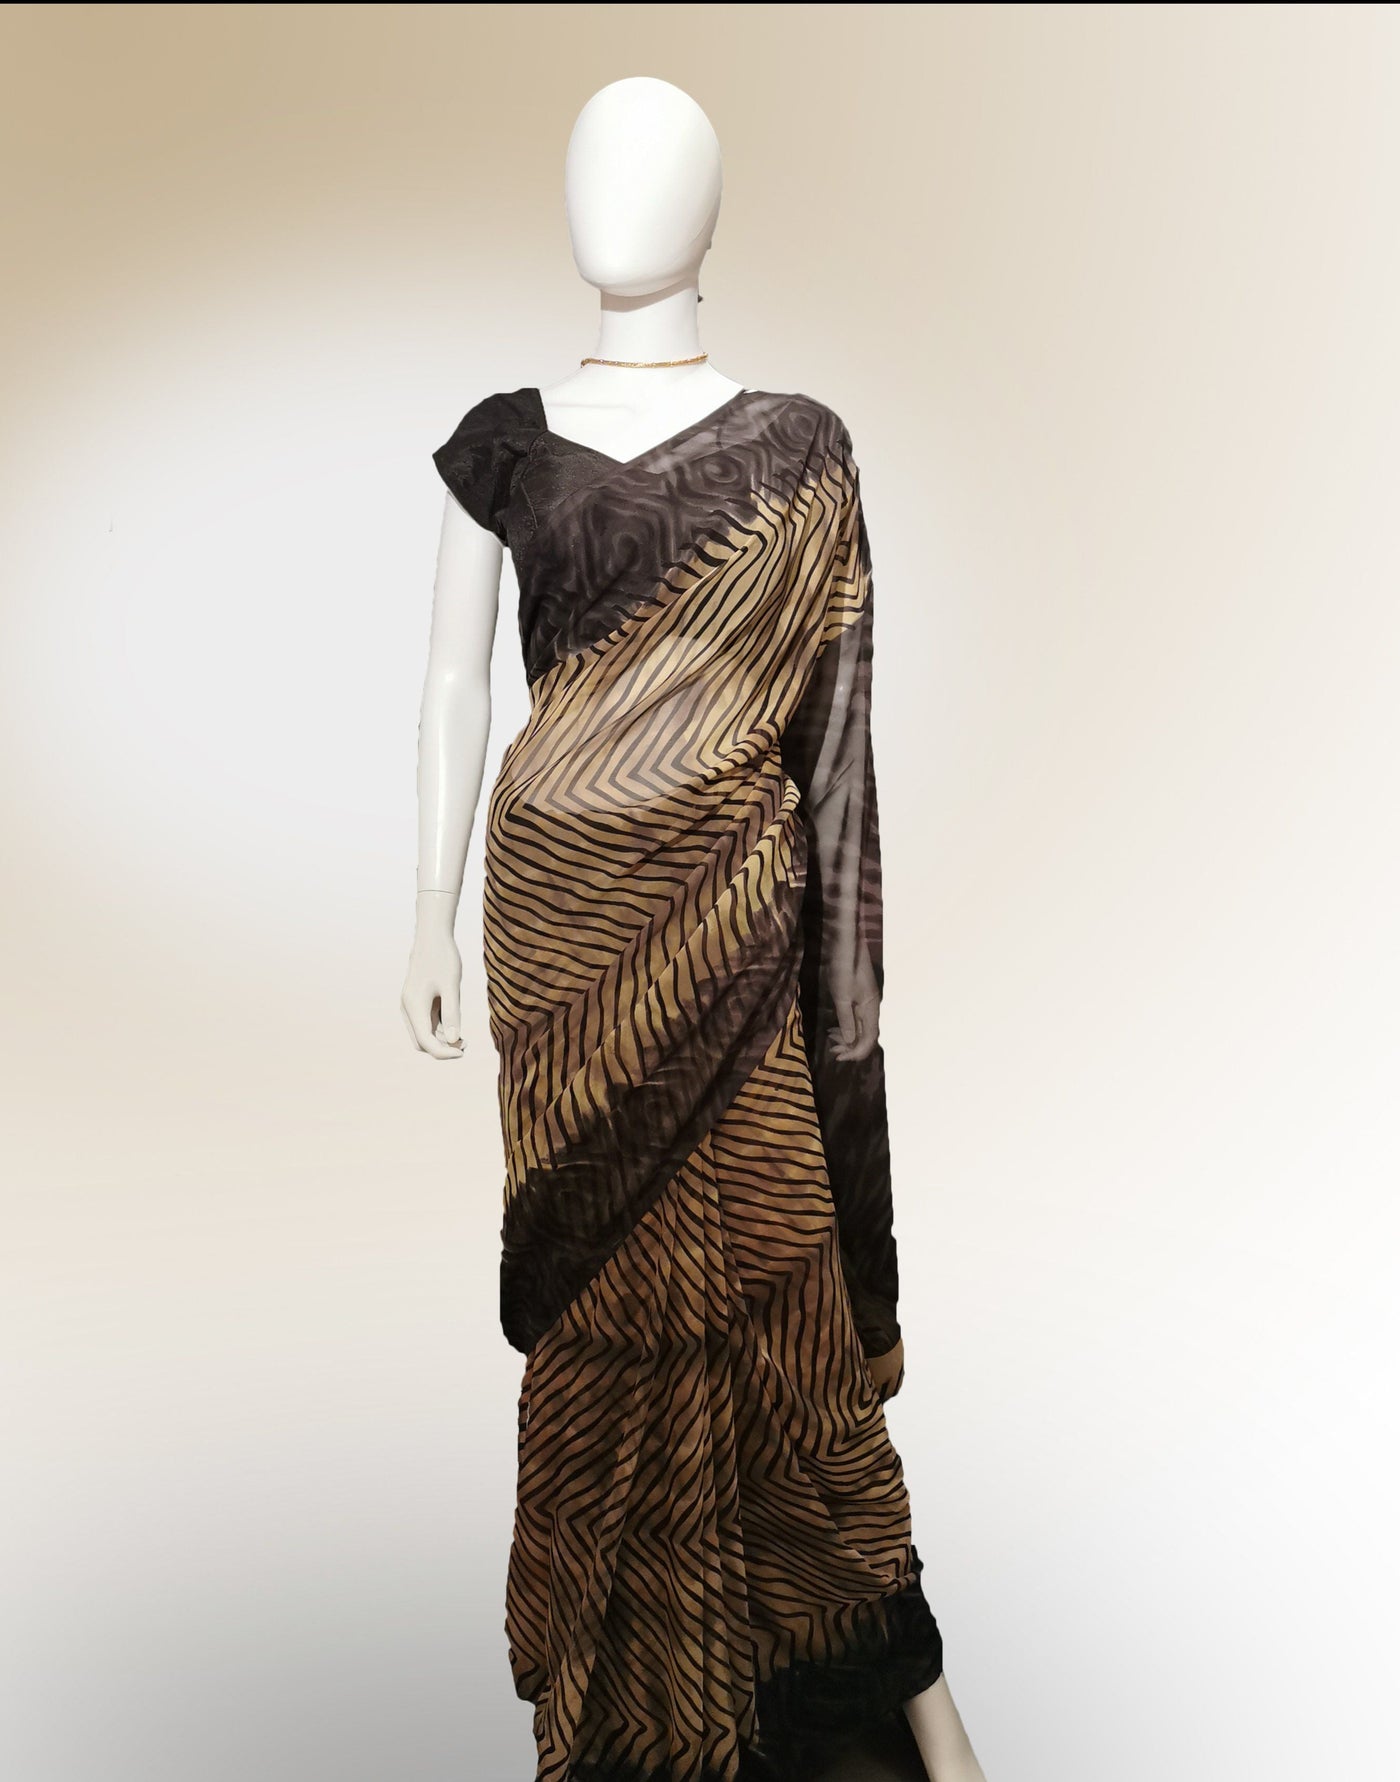 Saree in Coffee Brown with Striped Print Design Indian Clothing in Denver, CO, Aurora, CO, Boulder, CO, Fort Collins, CO, Colorado Springs, CO, Parker, CO, Highlands Ranch, CO, Cherry Creek, CO, Centennial, CO, and Longmont, CO. NATIONWIDE SHIPPING USA- India Fashion X